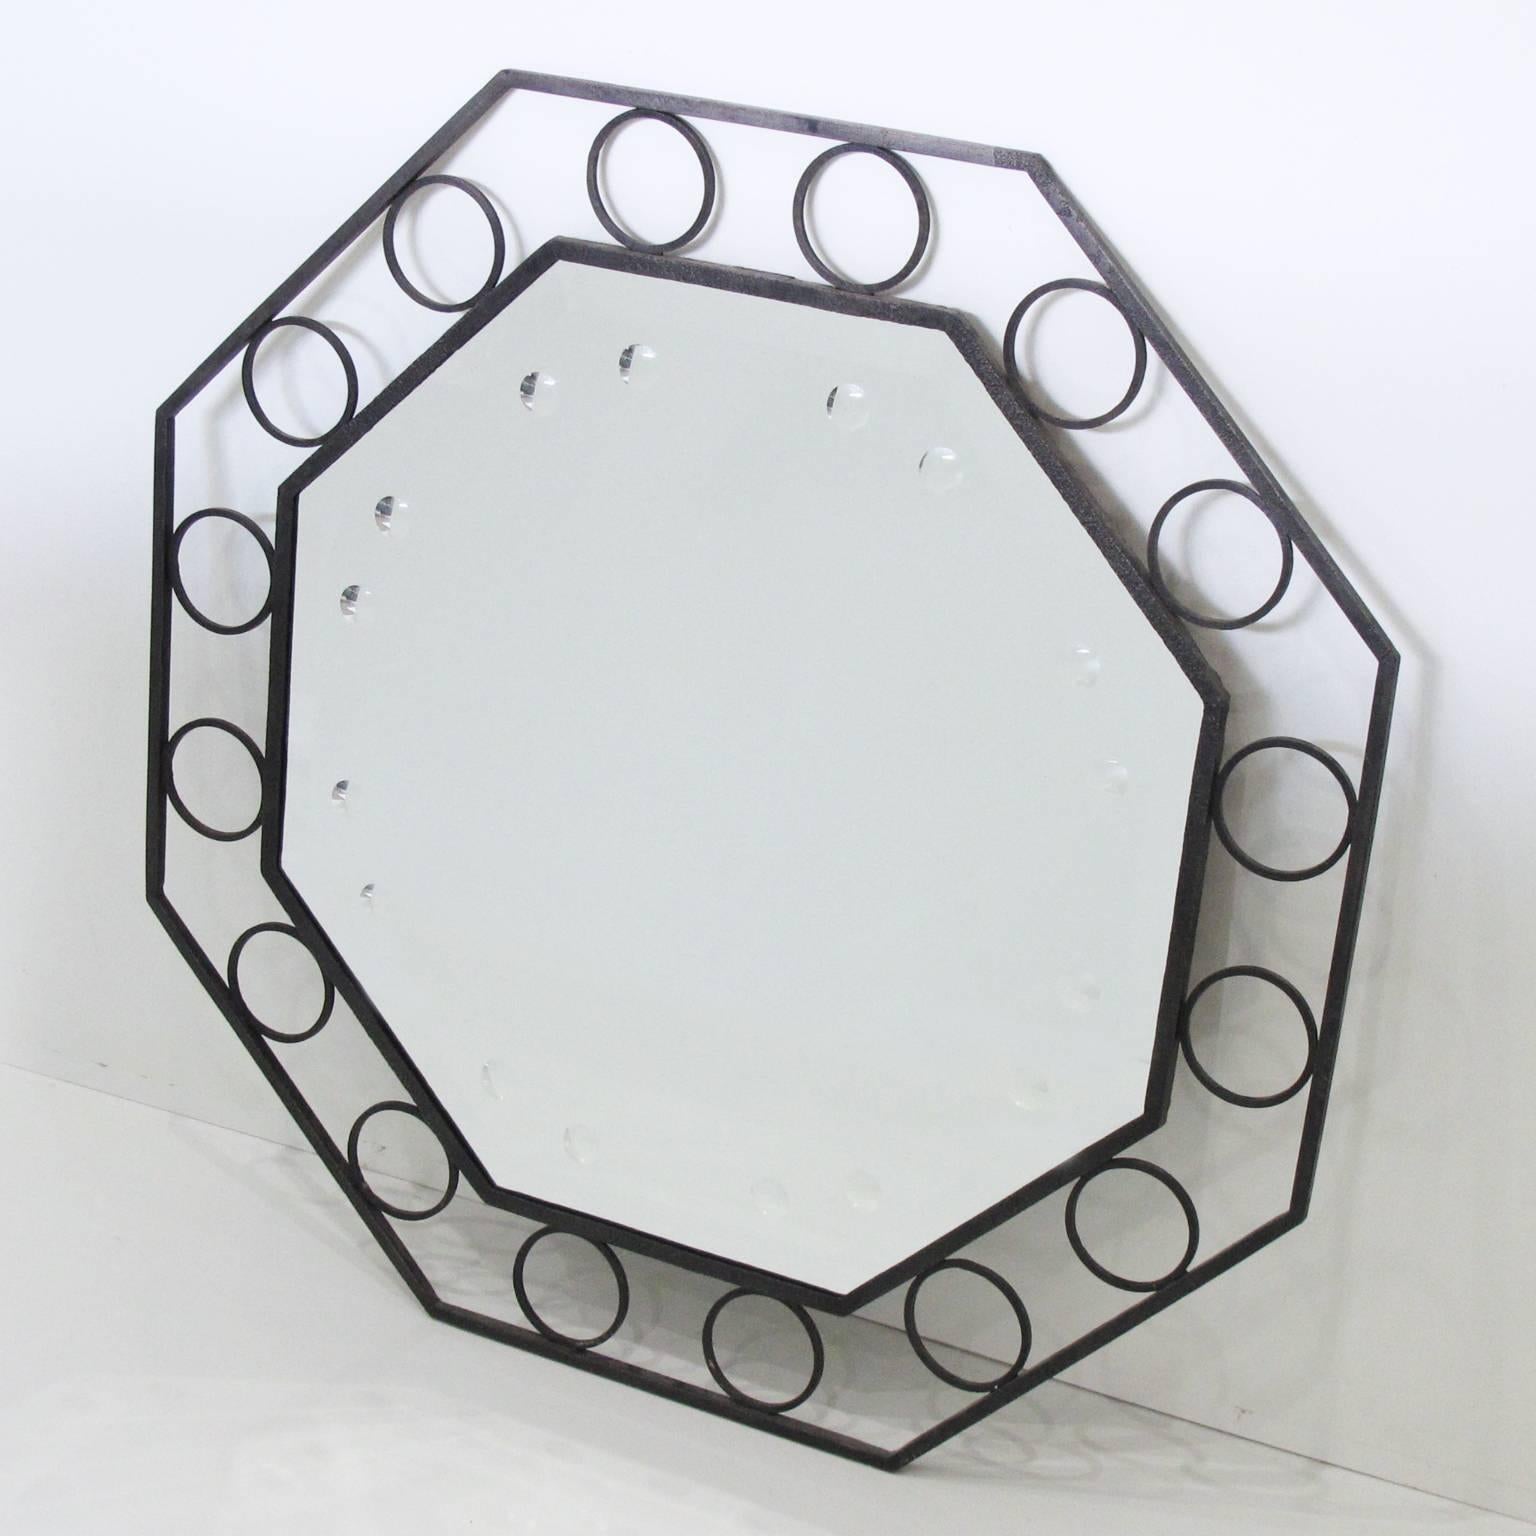 Vintage French Mid-Century modernist cast iron wall mirror, circa 1950s. Large octagonal shape with elegant cast iron frame with original black patina. Mirror insert ornate with optic bullseye motifs. Excellent vintage condition.

Measurements: